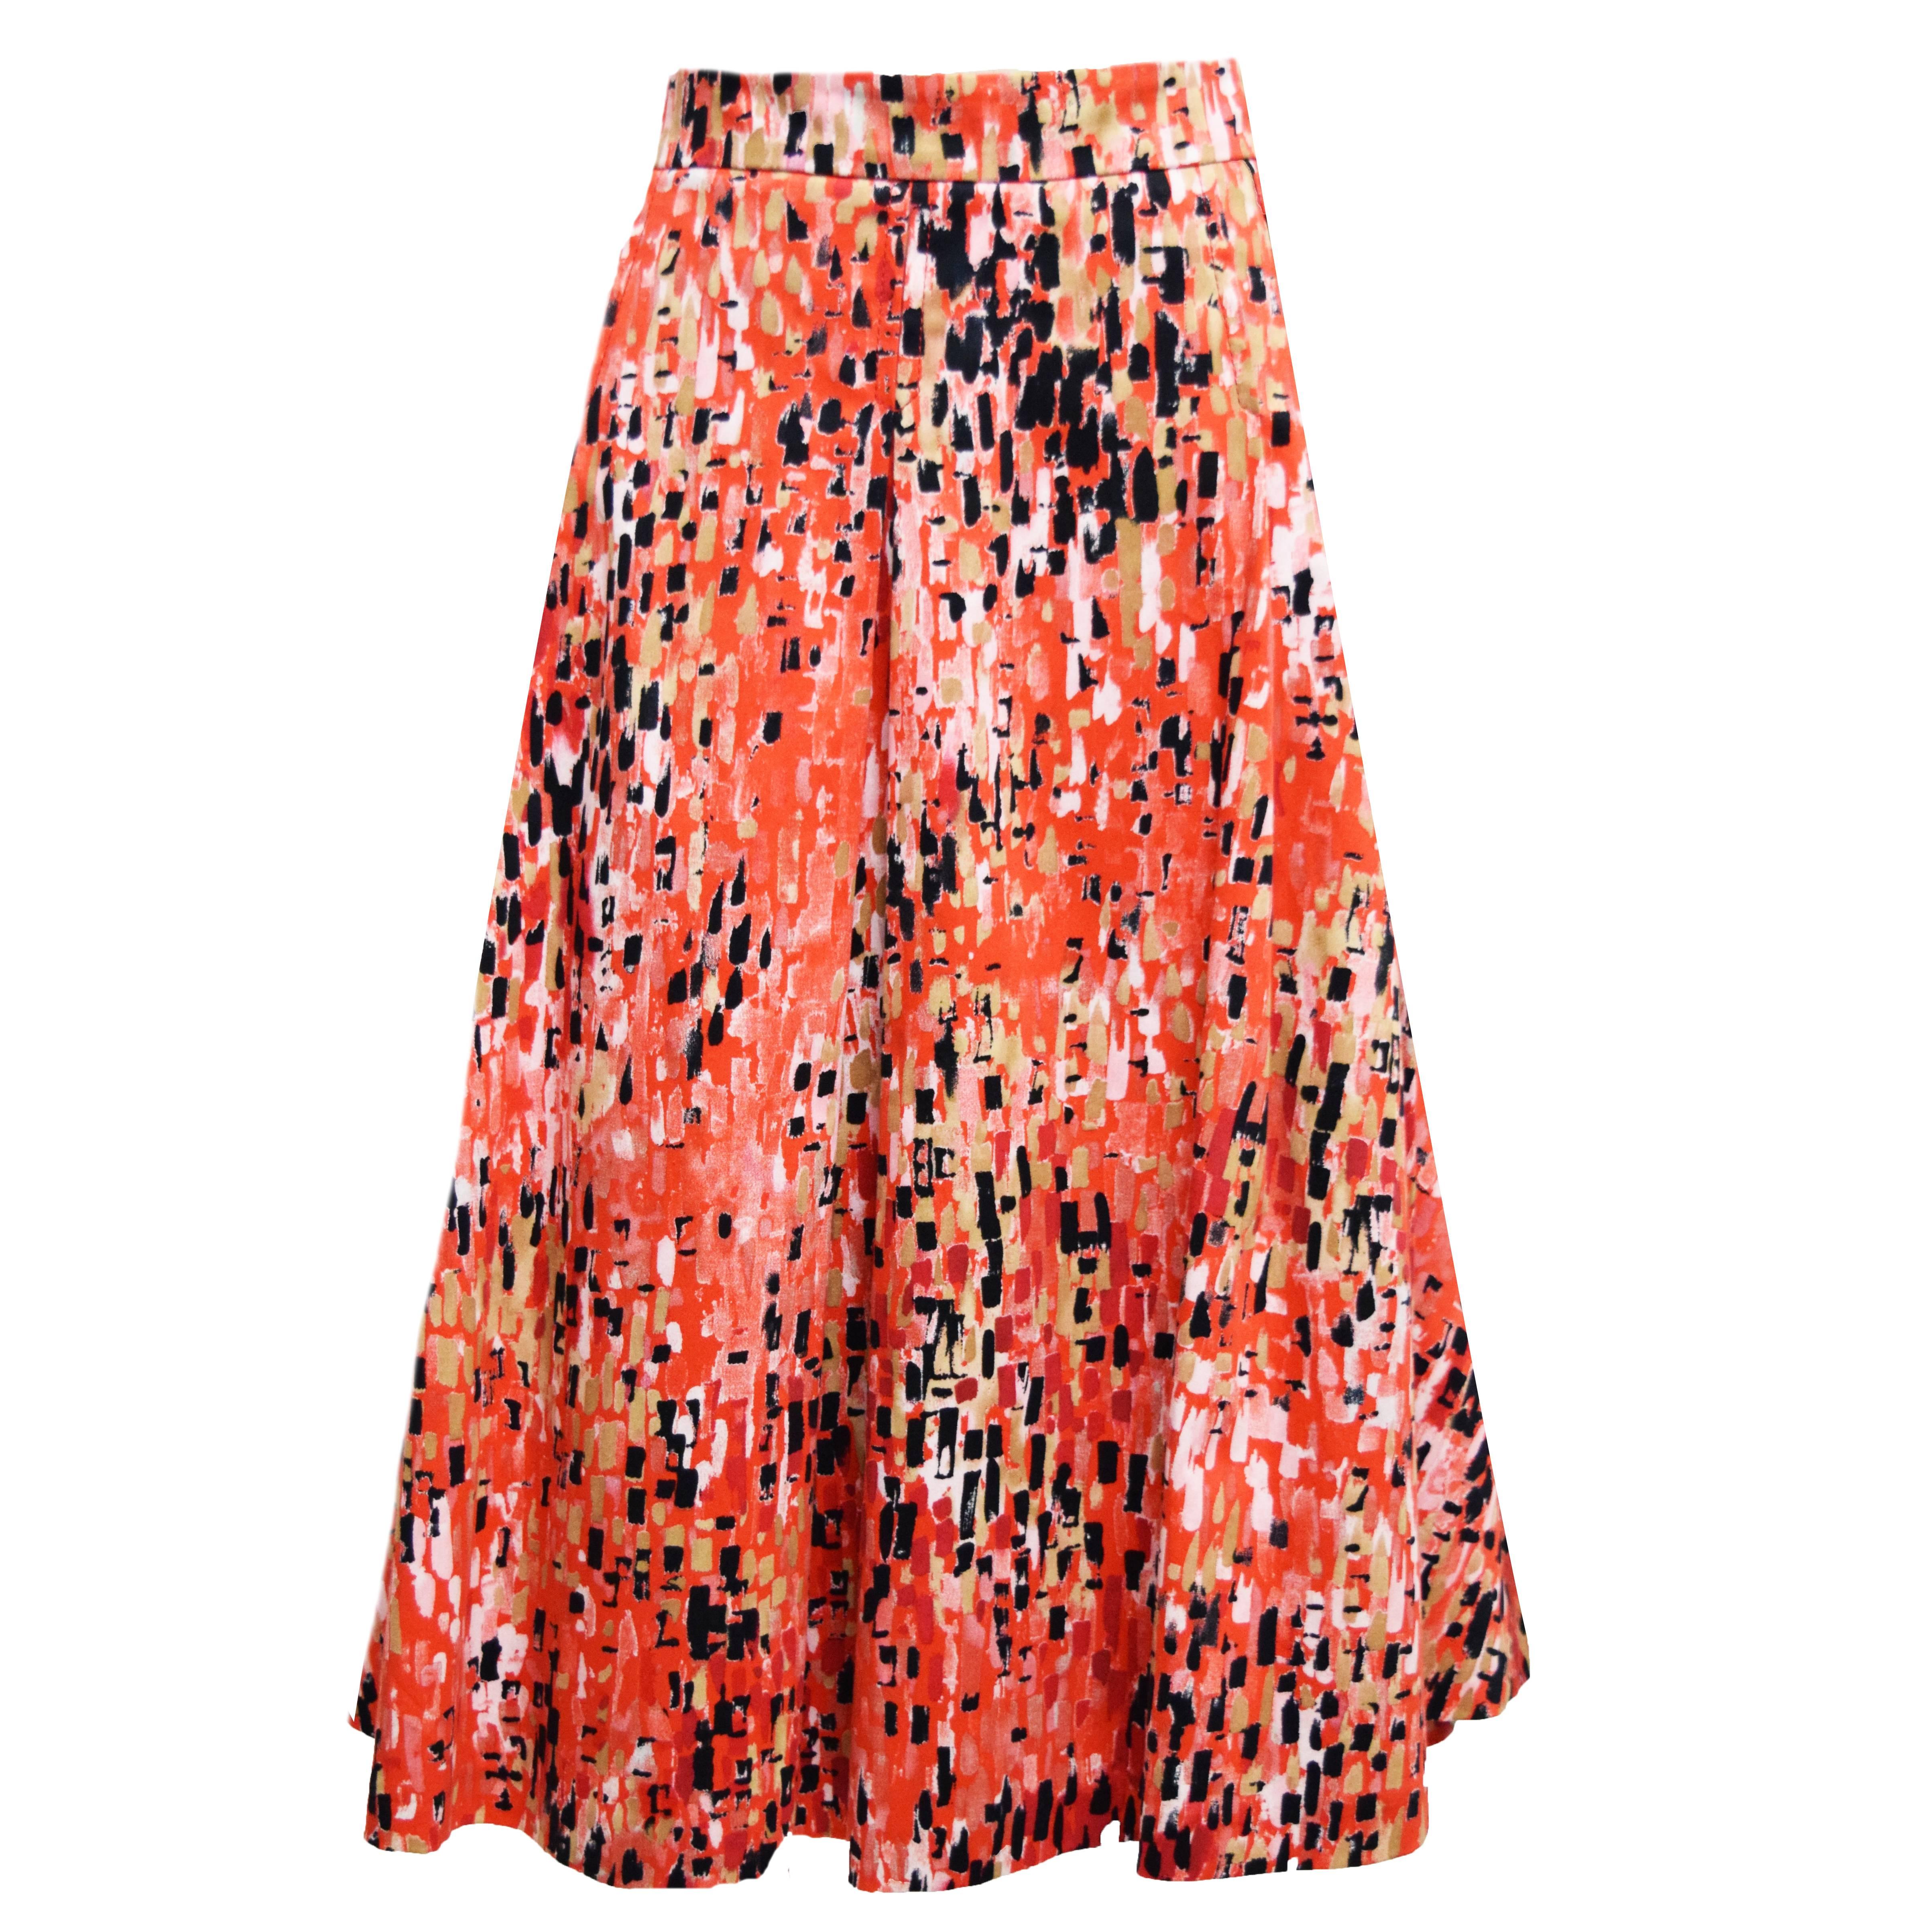 Carolina Herrera Full A-line Coral, Black, and Gold Abstract Print A-line Skirt 